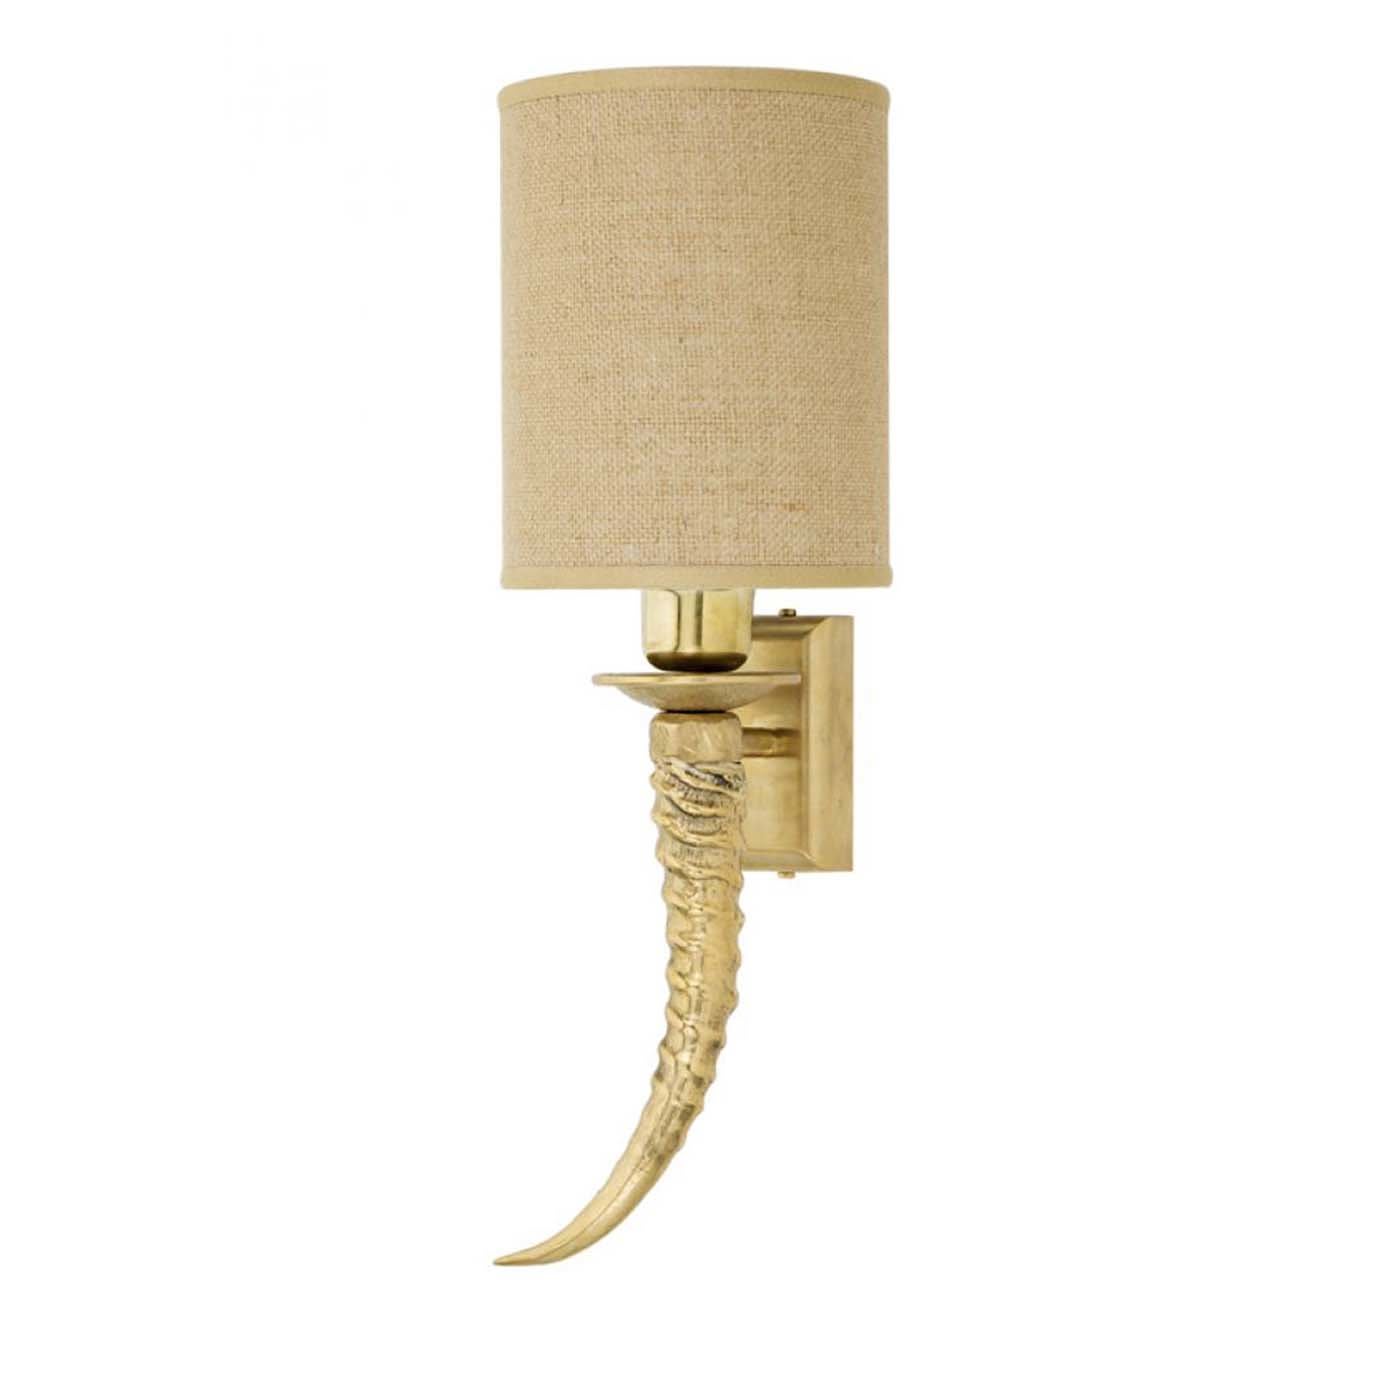 Horn Sconce - Bronzetto